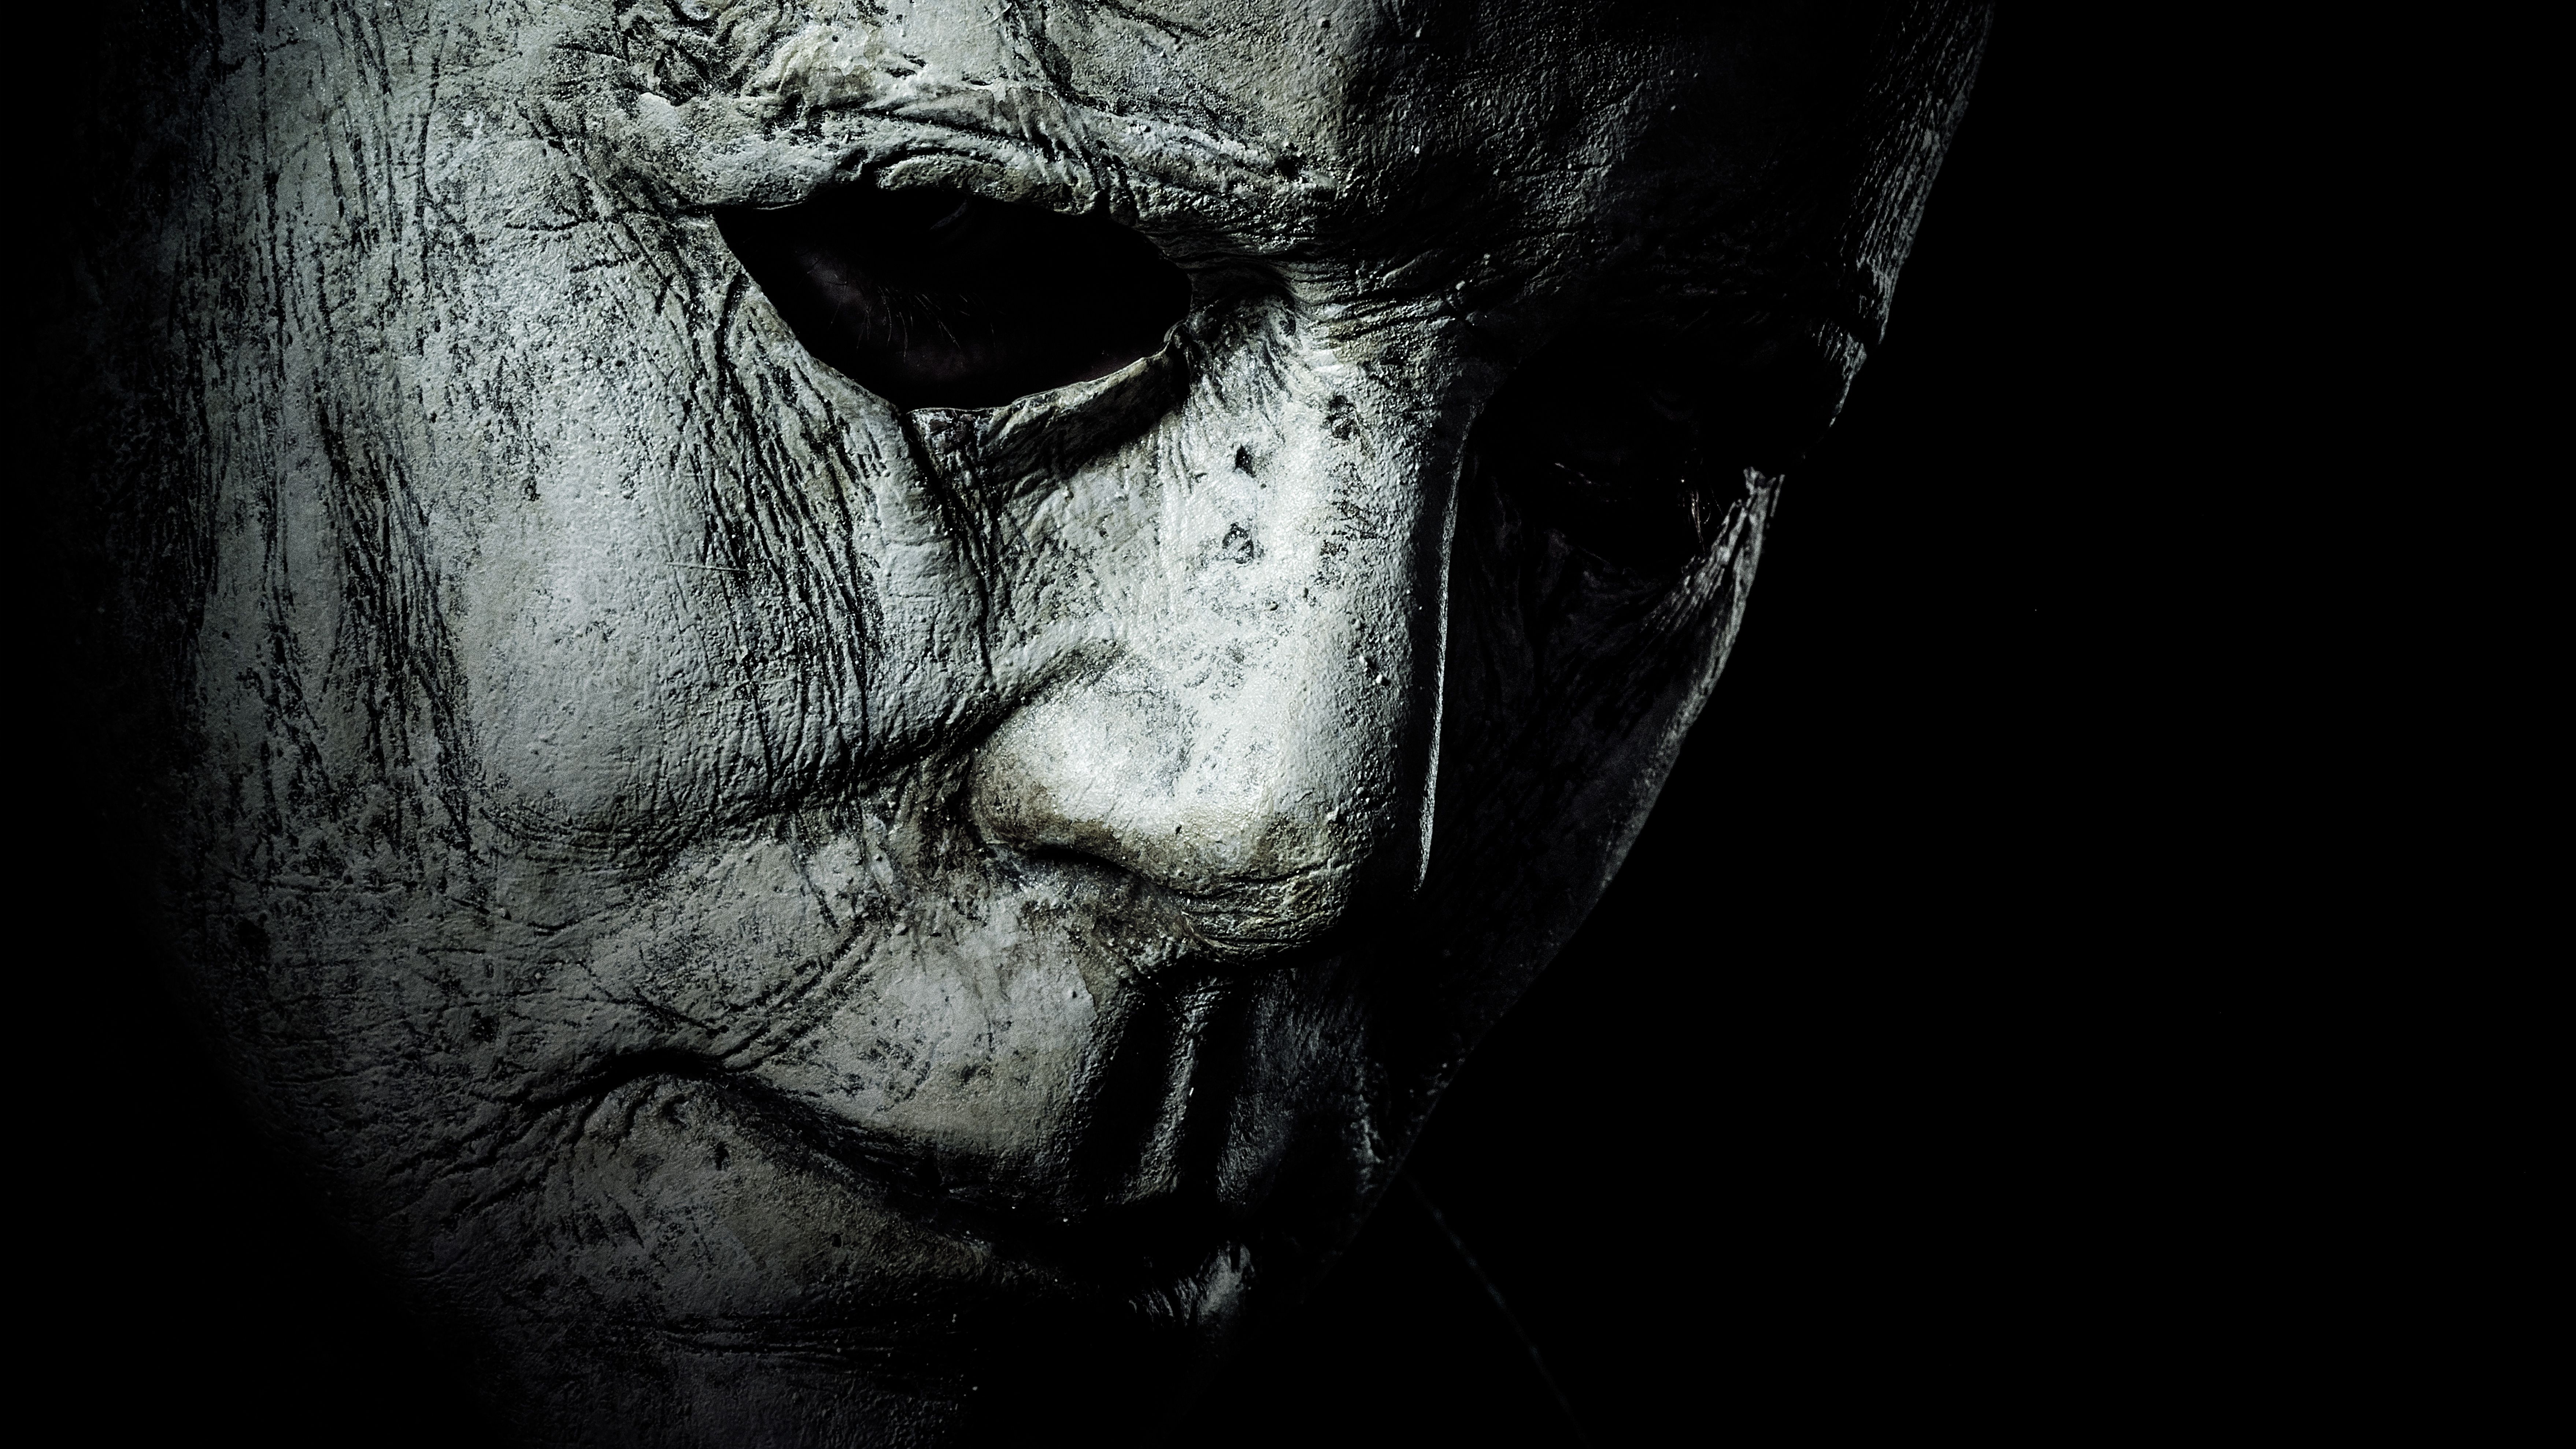 Halloween 4k Wallpapers posted by Sarah Anderson